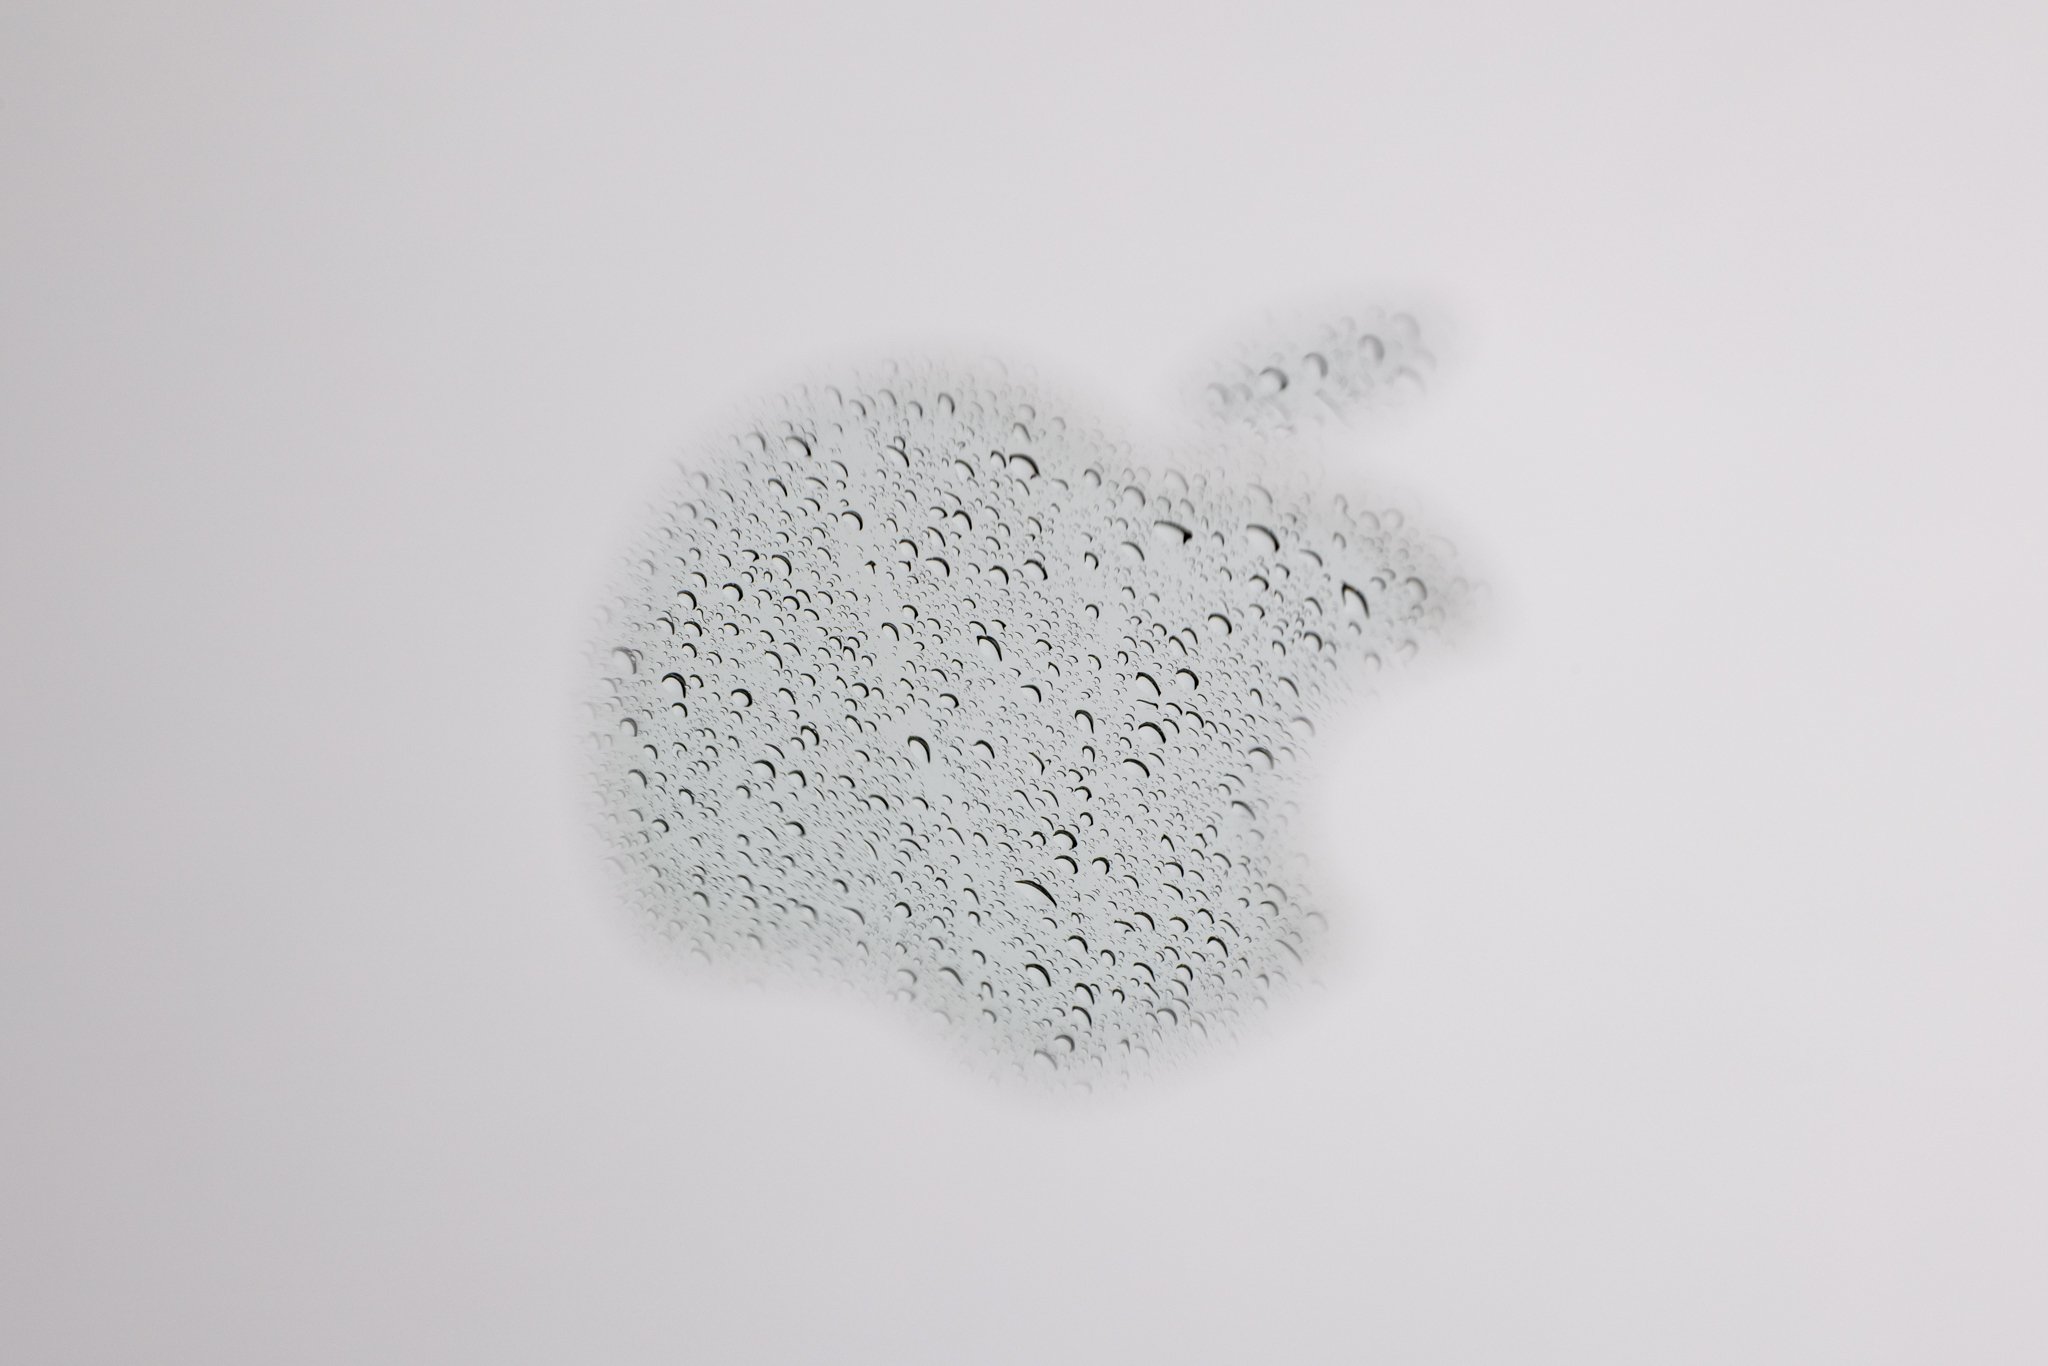 A reflection of rain in the Apple logo on a laptop photographed at f/16